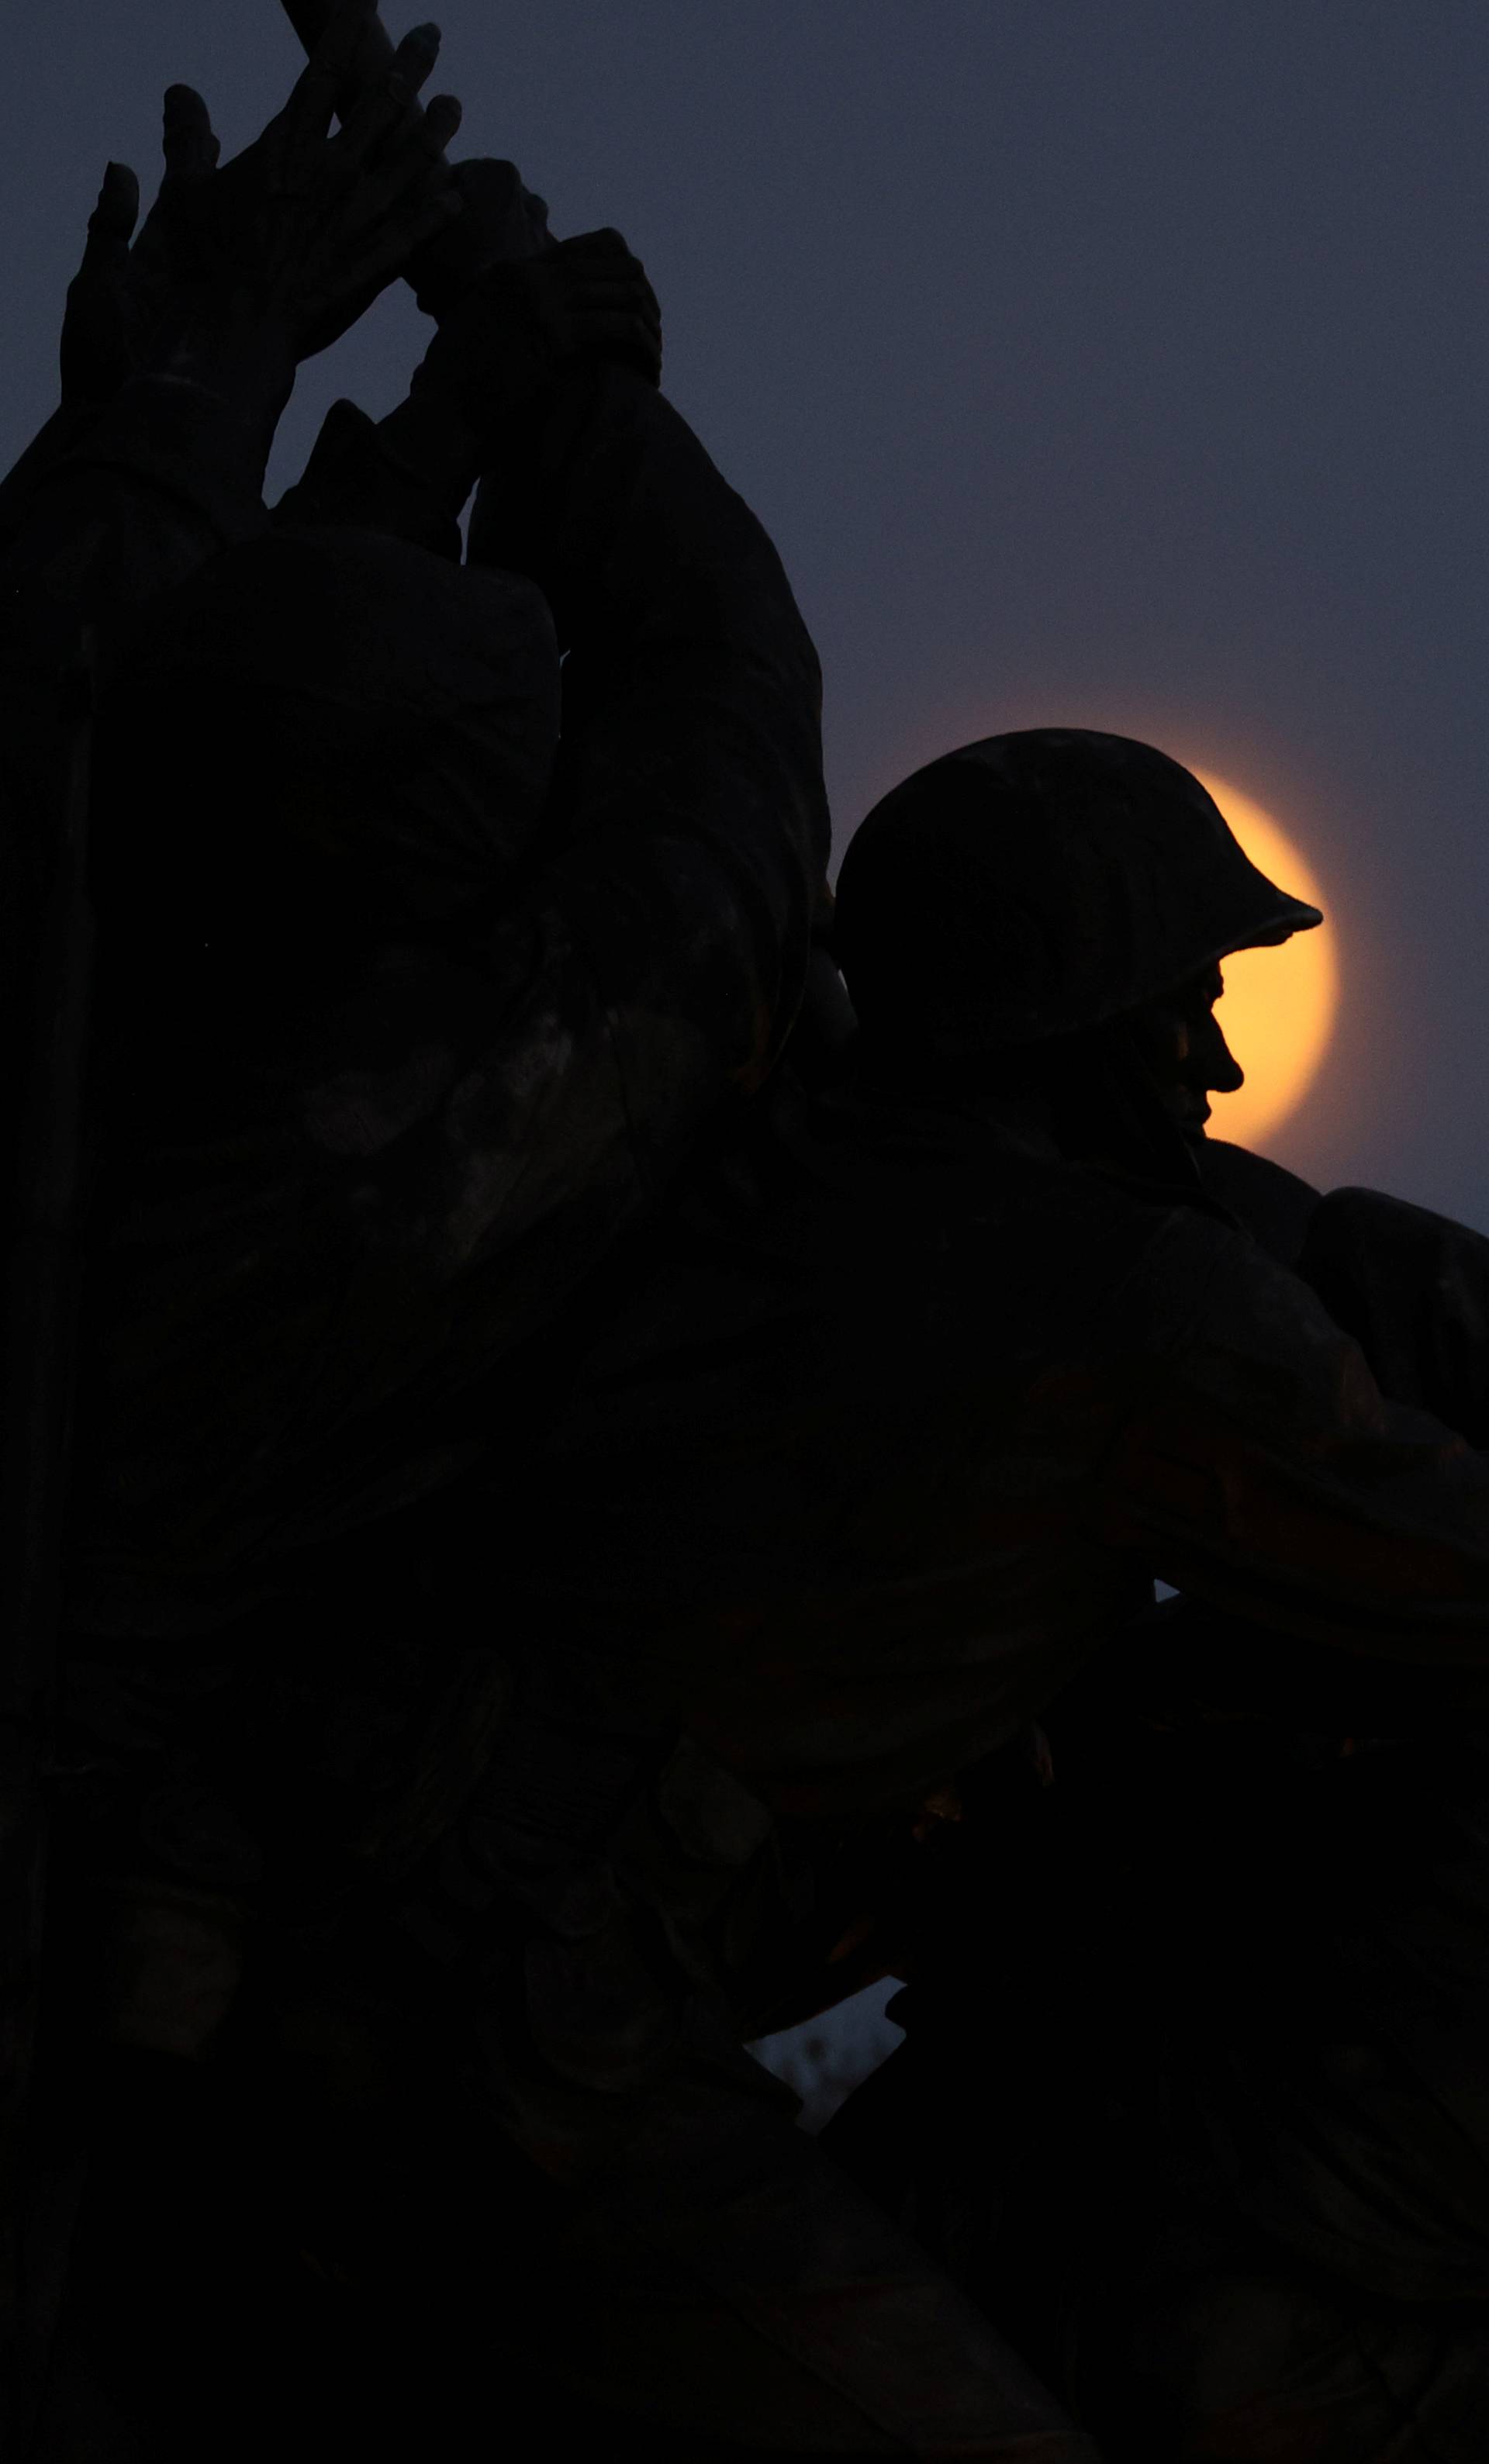 A rising supermoon frames the statue of soldiers in the U.S. Marine Corps War Memorial, depicting the WWII flag raising on Iwo Jima, in Arlington, Virginia